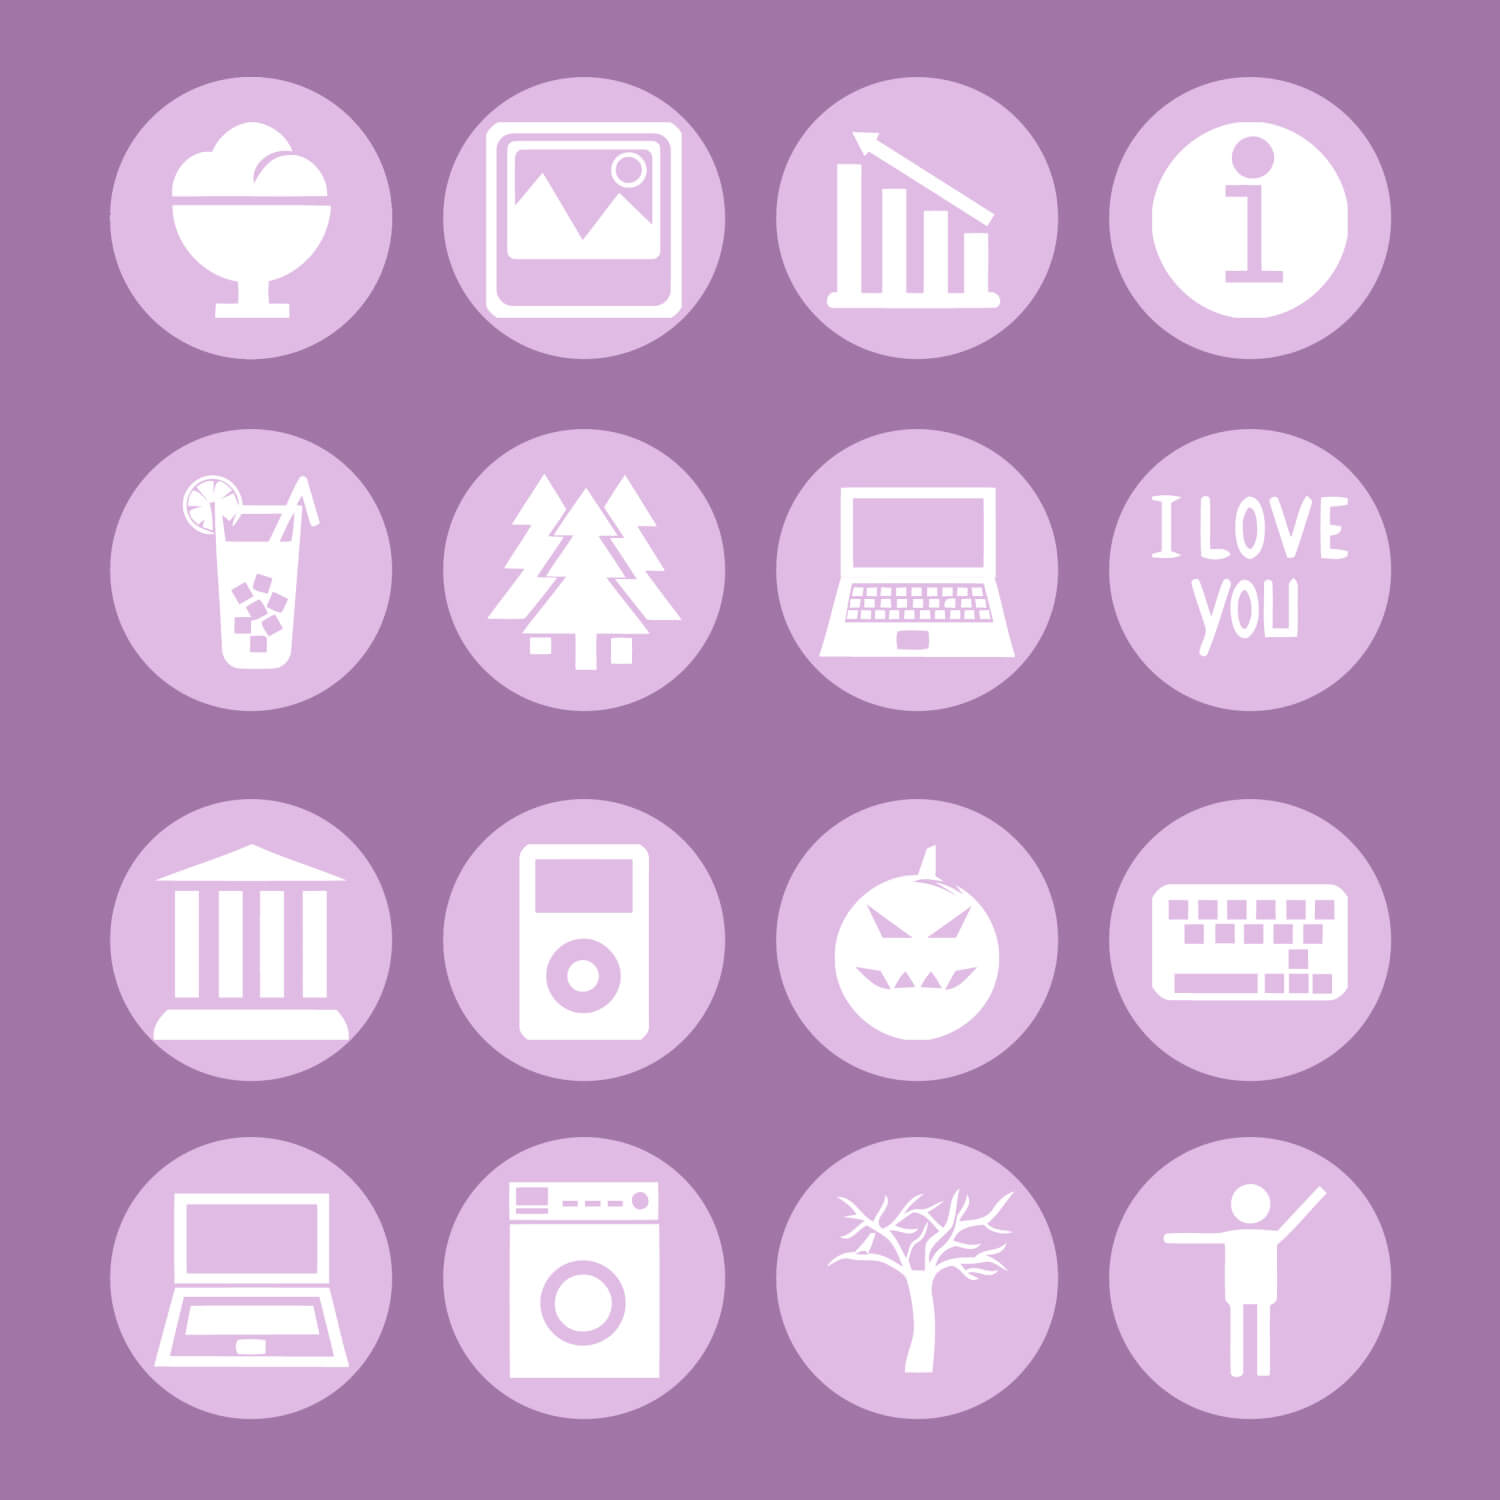 840 purple paster icons